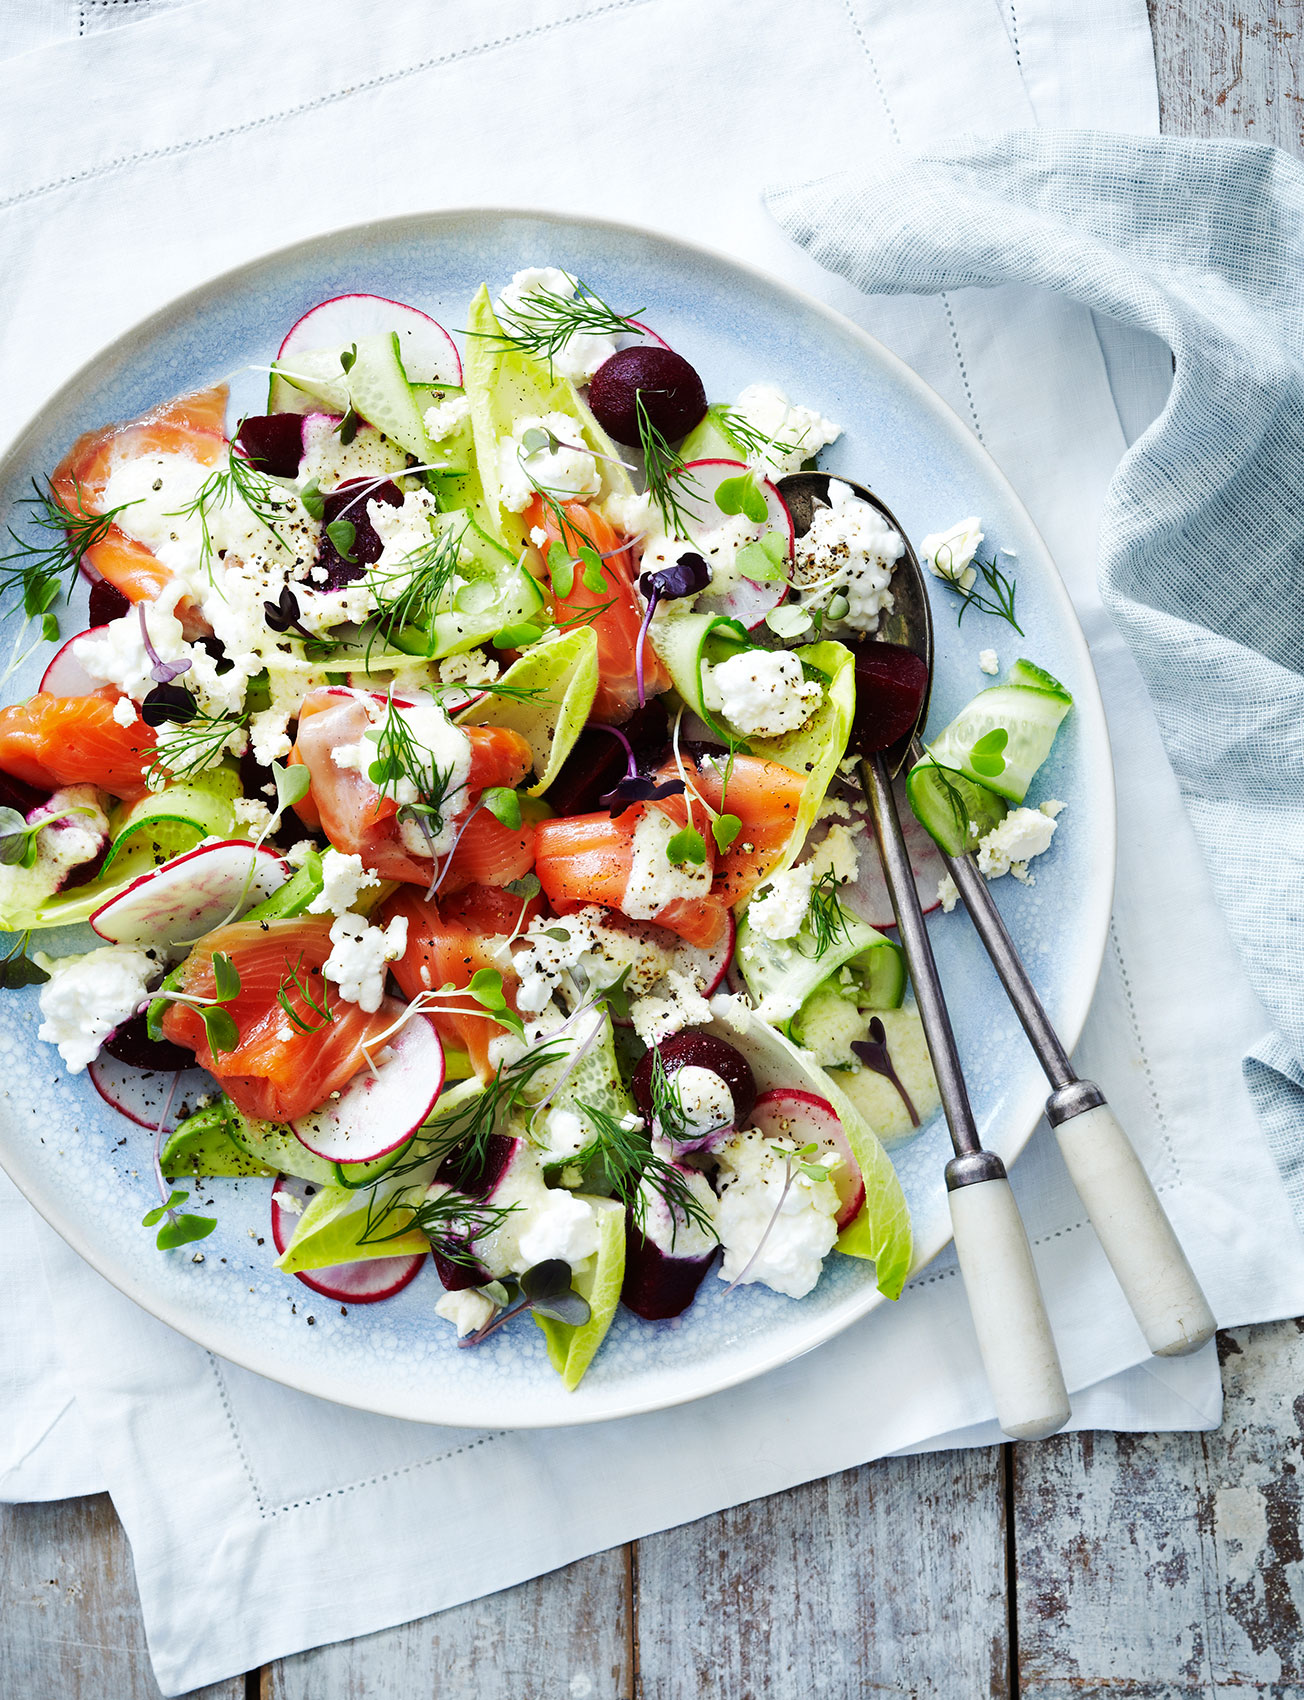 Simple Salads • Ladies Lunch Salmon & Feta Salad with Cucumber & Dill • Cookbook & Editorial Food Photography